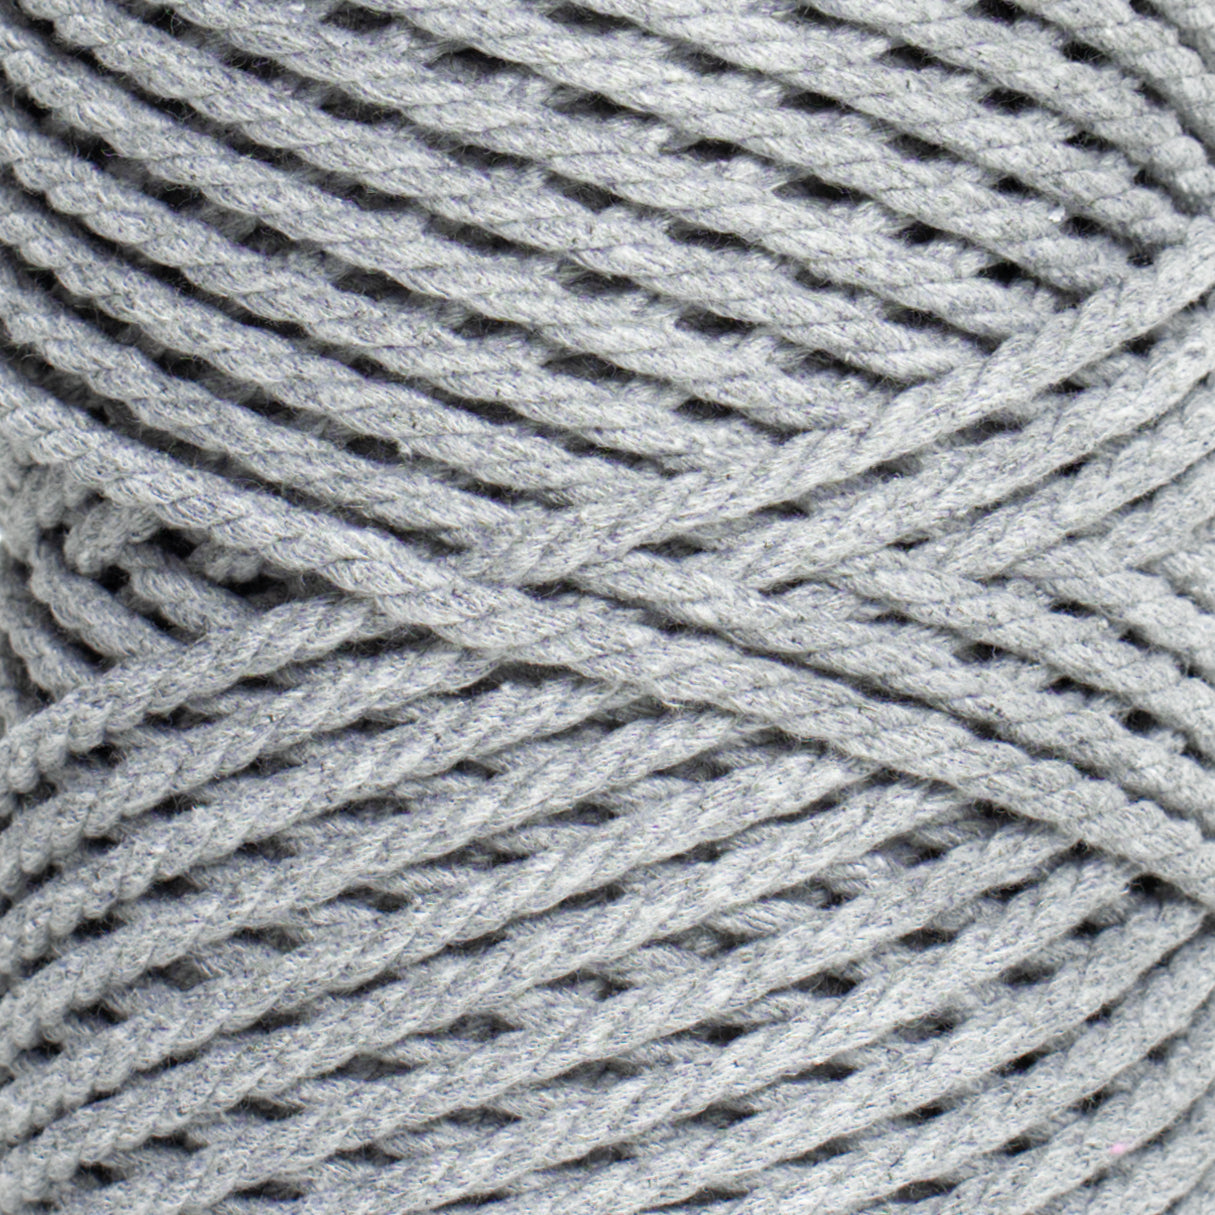 COTTON ROPE ZERO WASTE 3 MM - 3 PLY - HEATHER GRAY COLOR